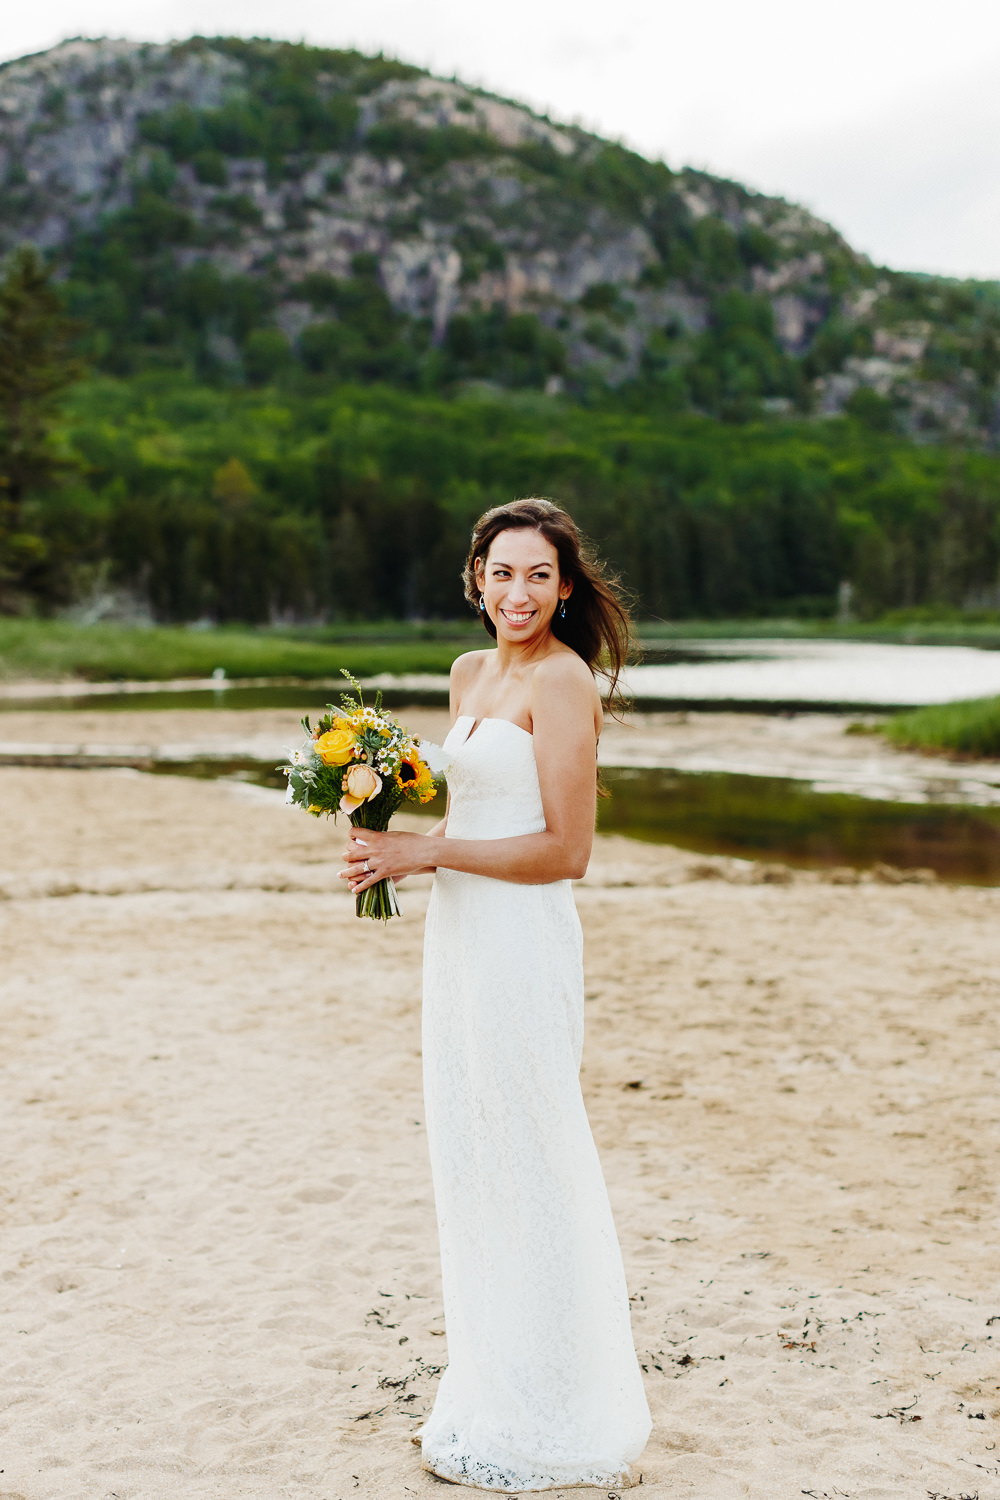 Bride with her bouquet at Sand Beach in Acadia National Park